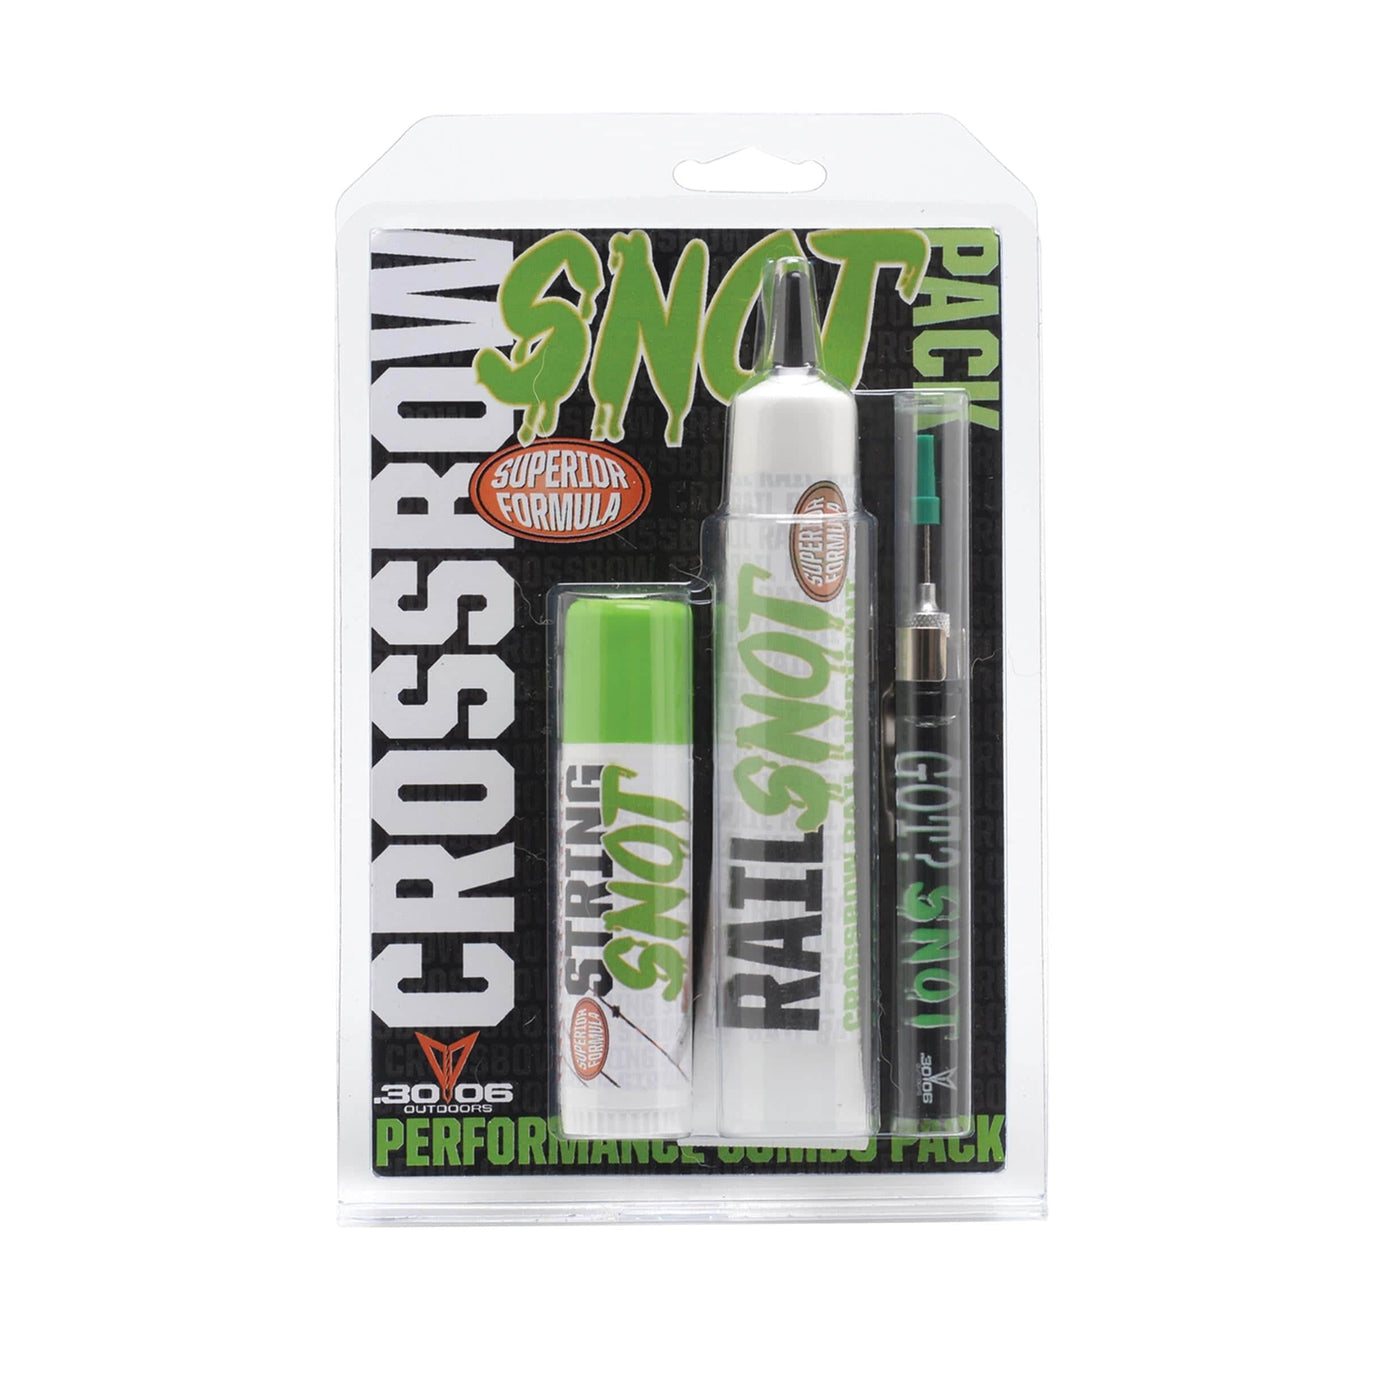 .30-06 Outdoors .30-06 Snot Lube 3 Pack for Crossbows Archery